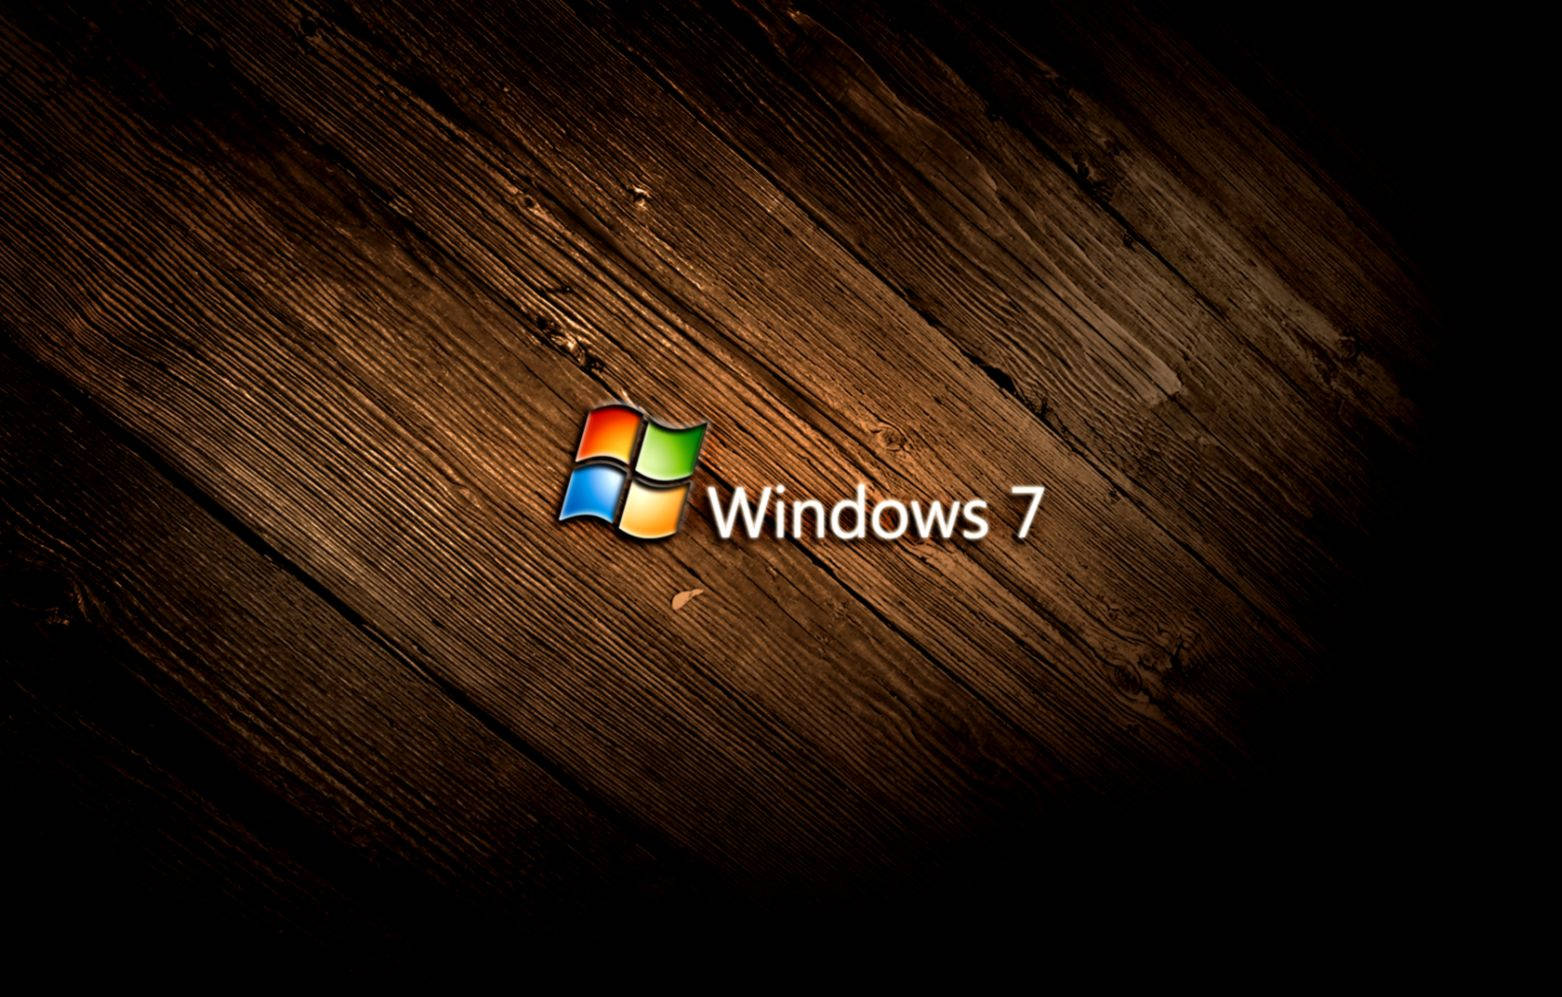 Experience a Timeless Classic with Windows 7 Wallpaper